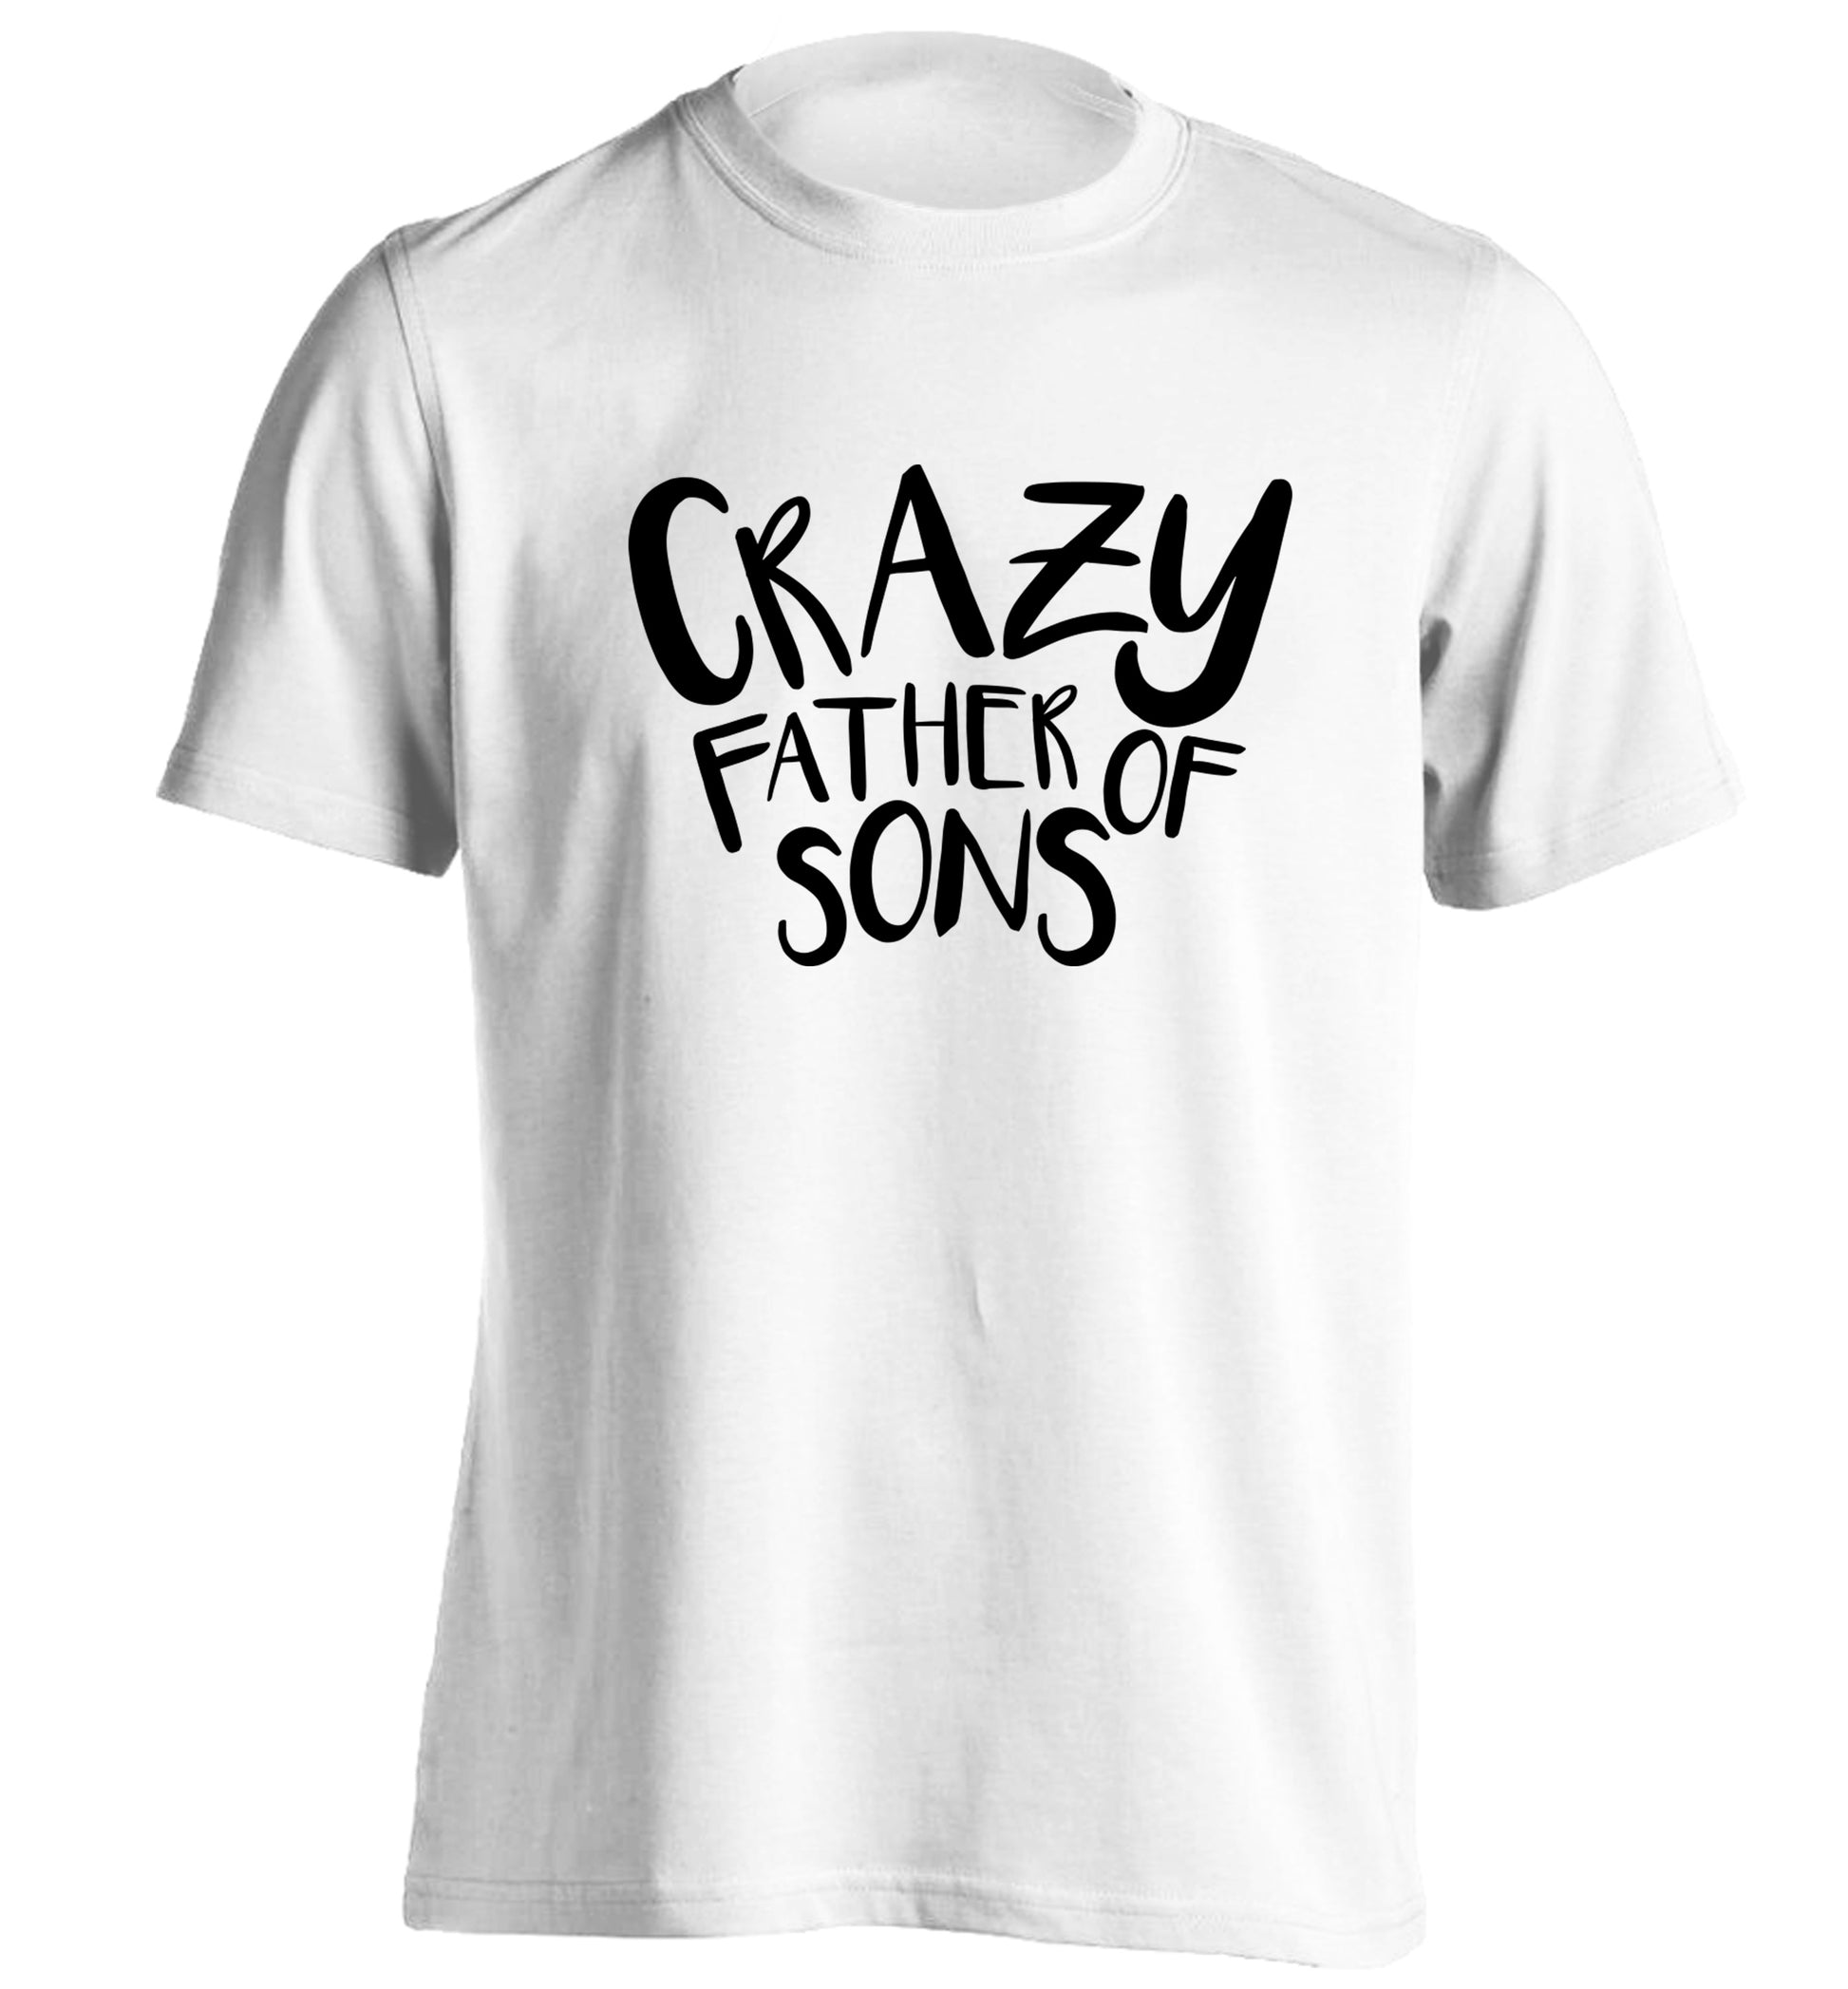 Crazy father of sons adults unisex white Tshirt 2XL